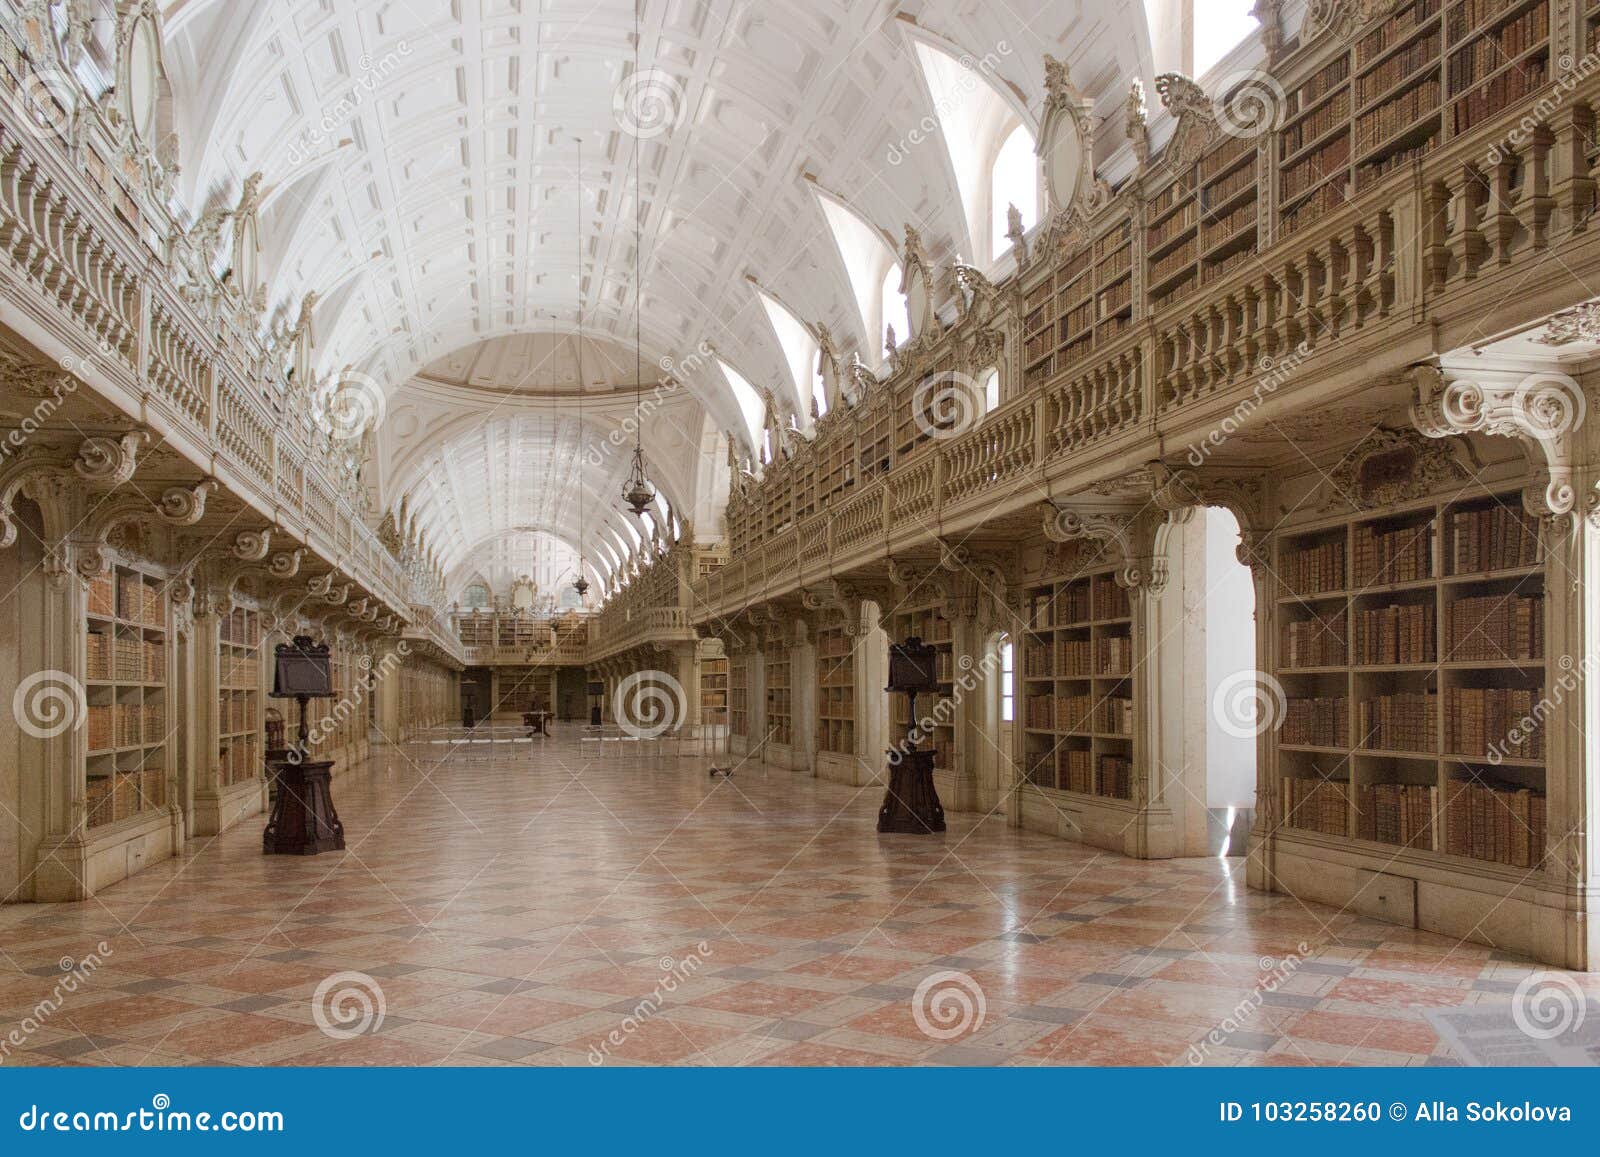 The Historic Interior Of The Library Old Castle Stock Photo Image Of Decorating Aristocrat